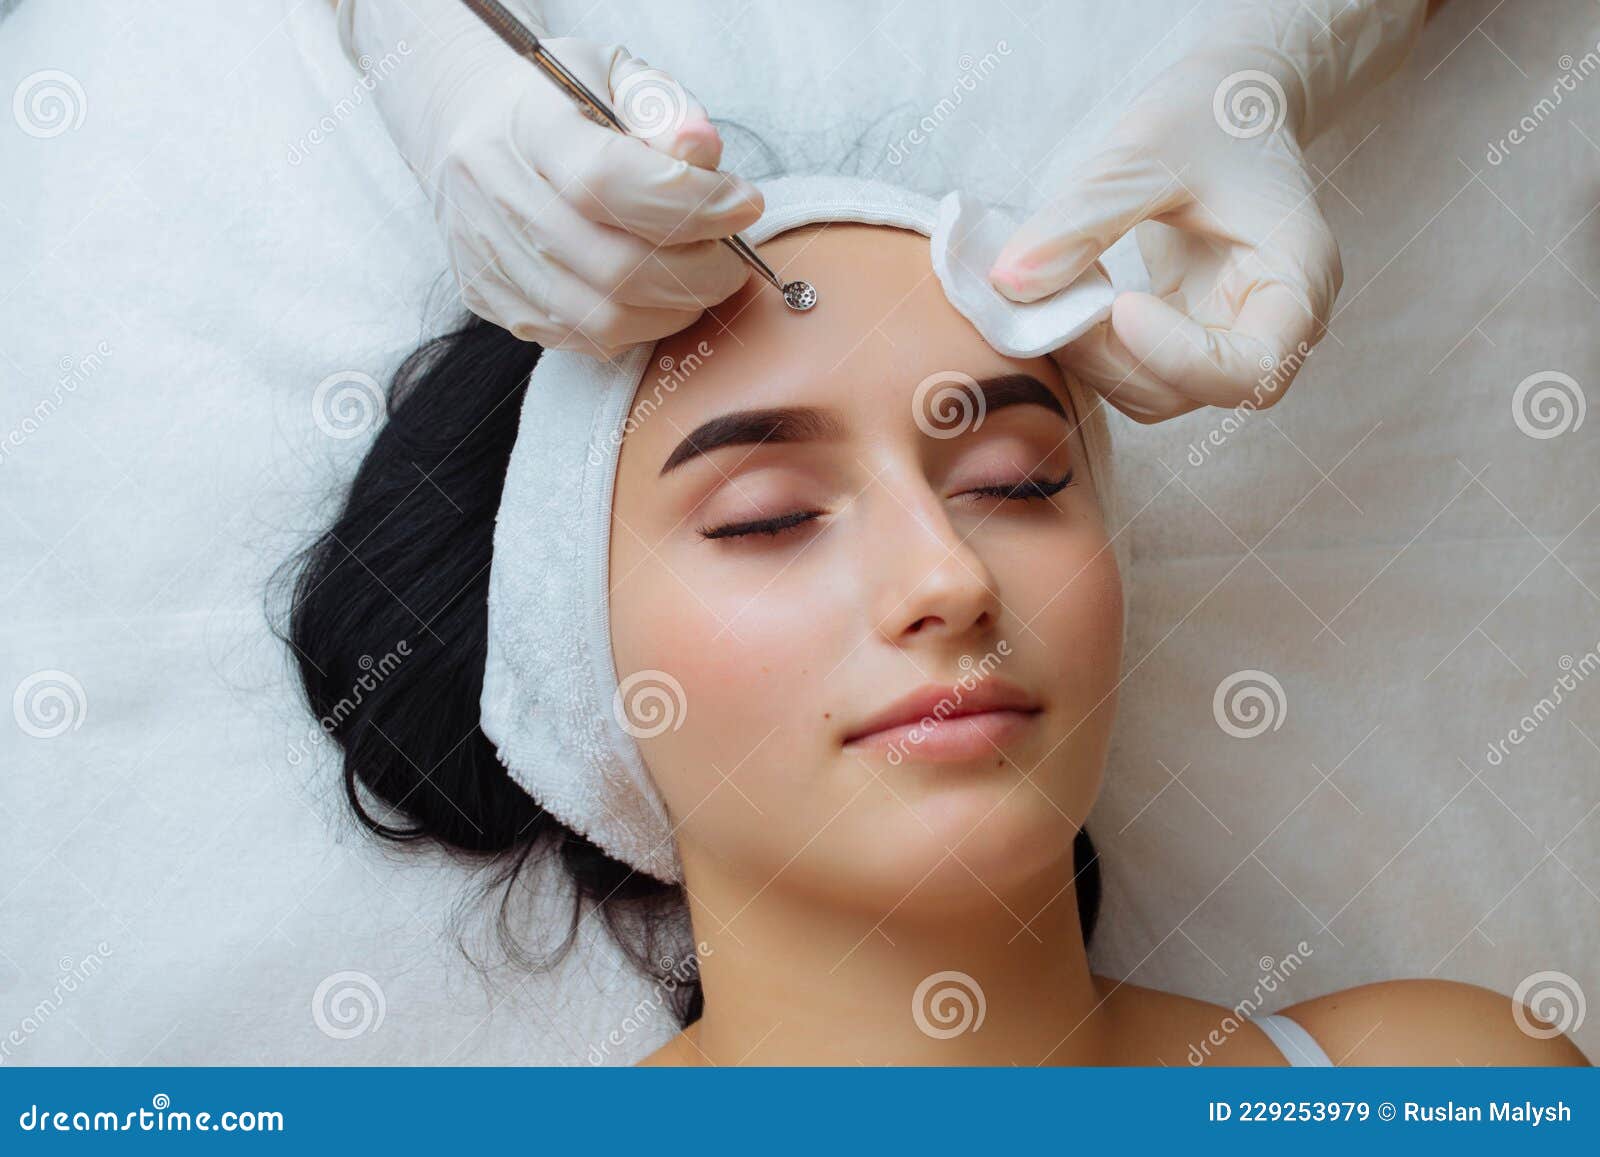 A Procedure For Mechanical Or Manual Face Cleansing By A Beautician